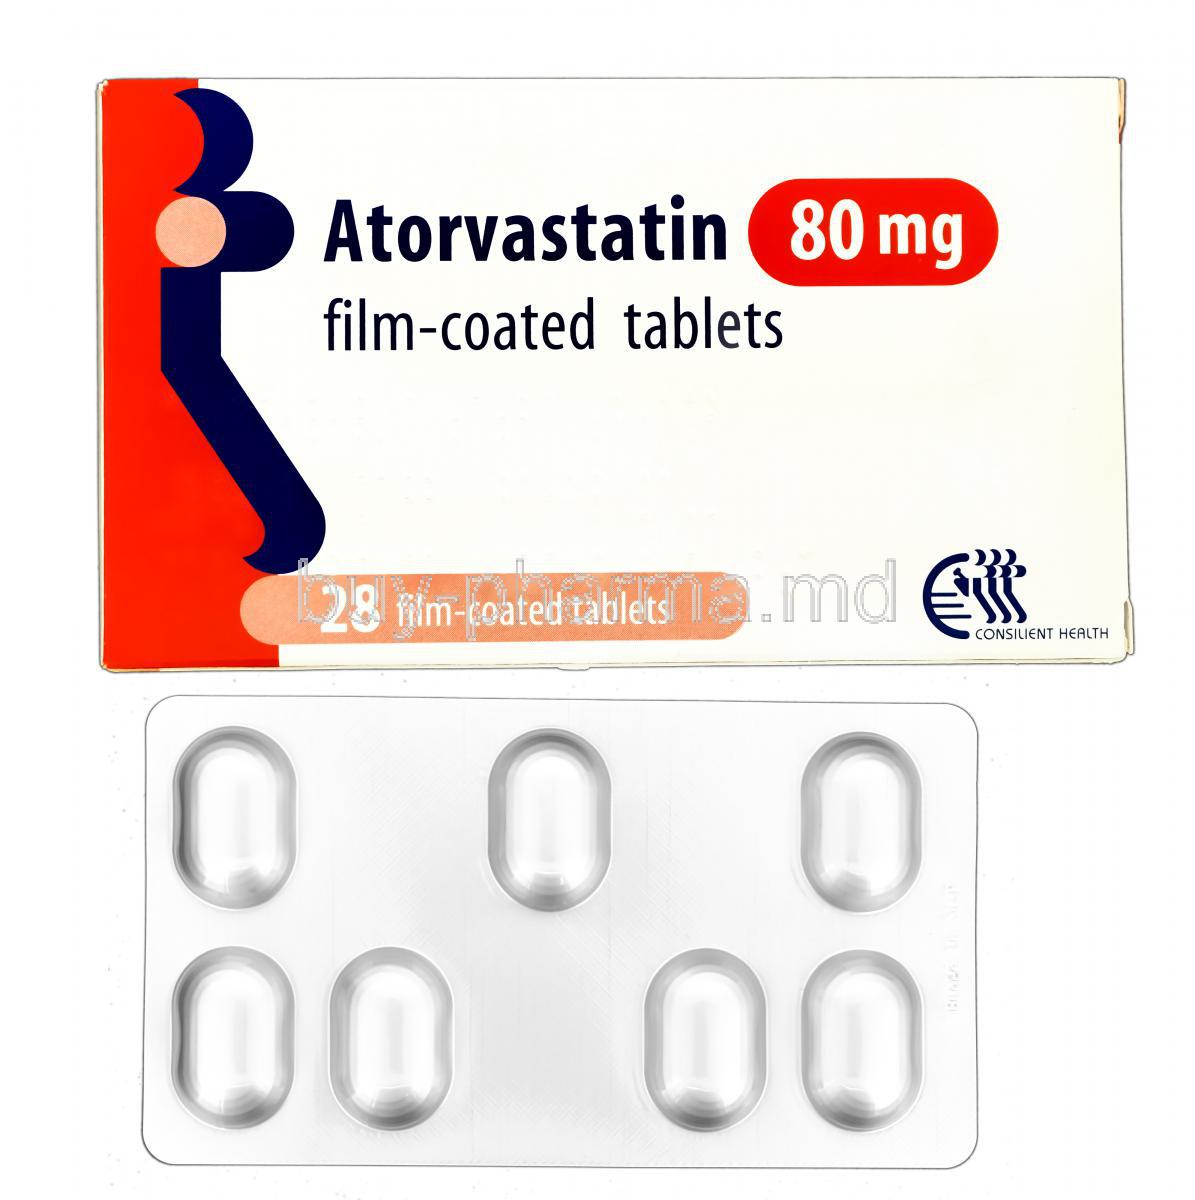 what is the generic name of atorvastatin